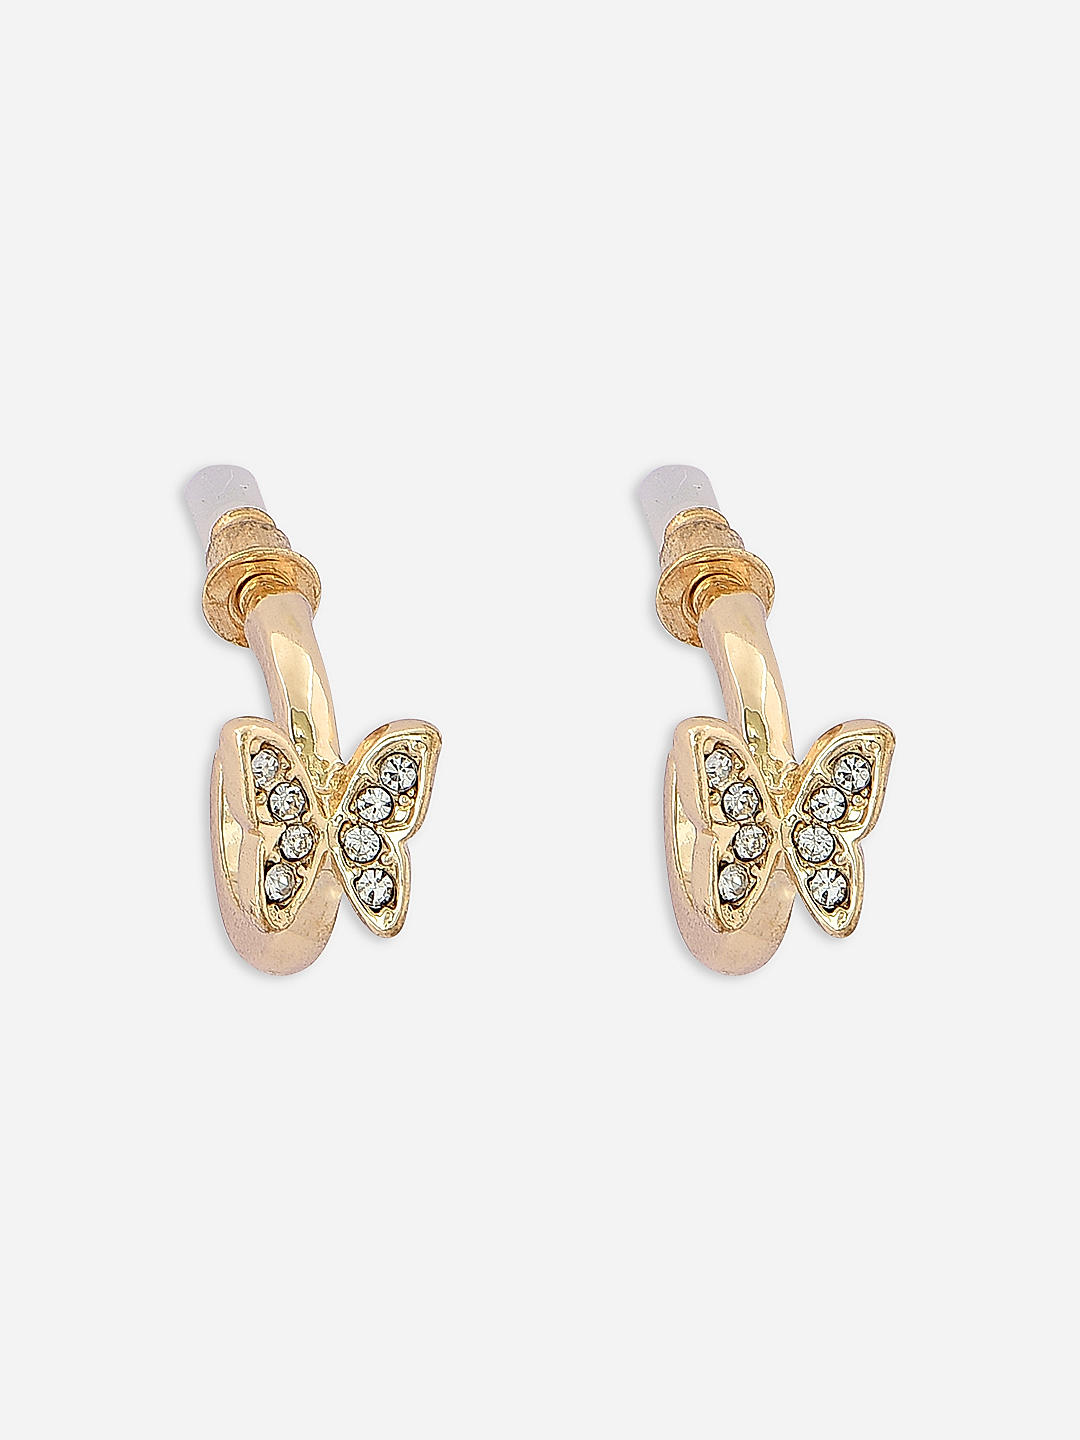 Buy gold earring | Top gold earring designs for daily use | Online